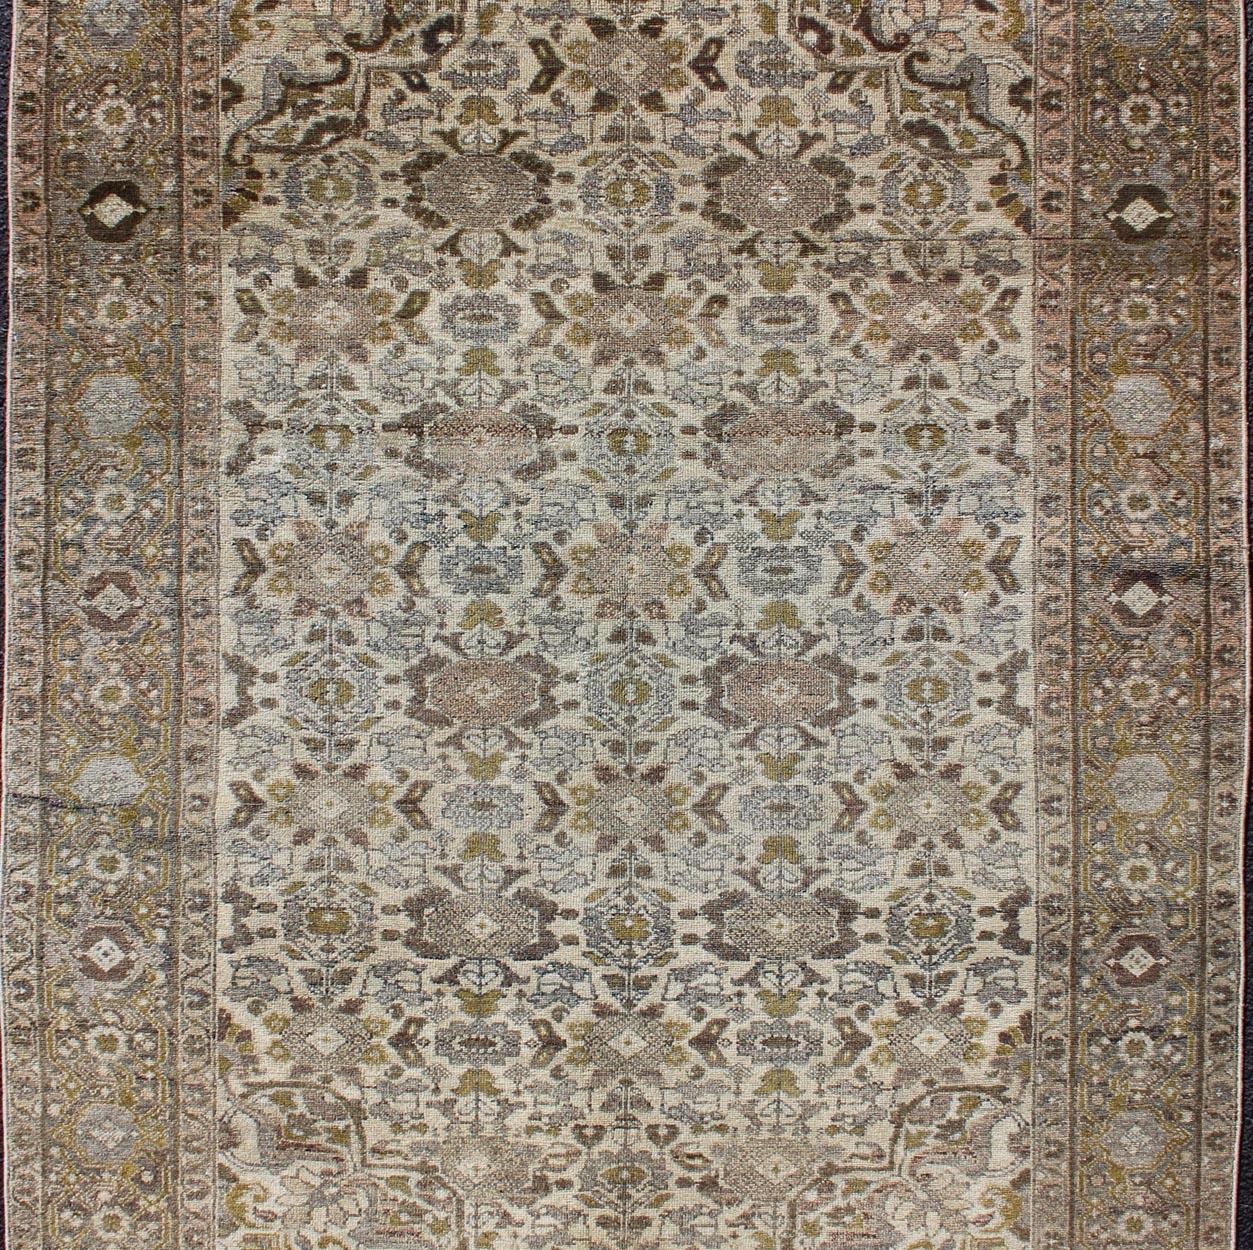 Tribal Antique Persian Malayer Rug with All-Over Boteh Design in Earth Tones